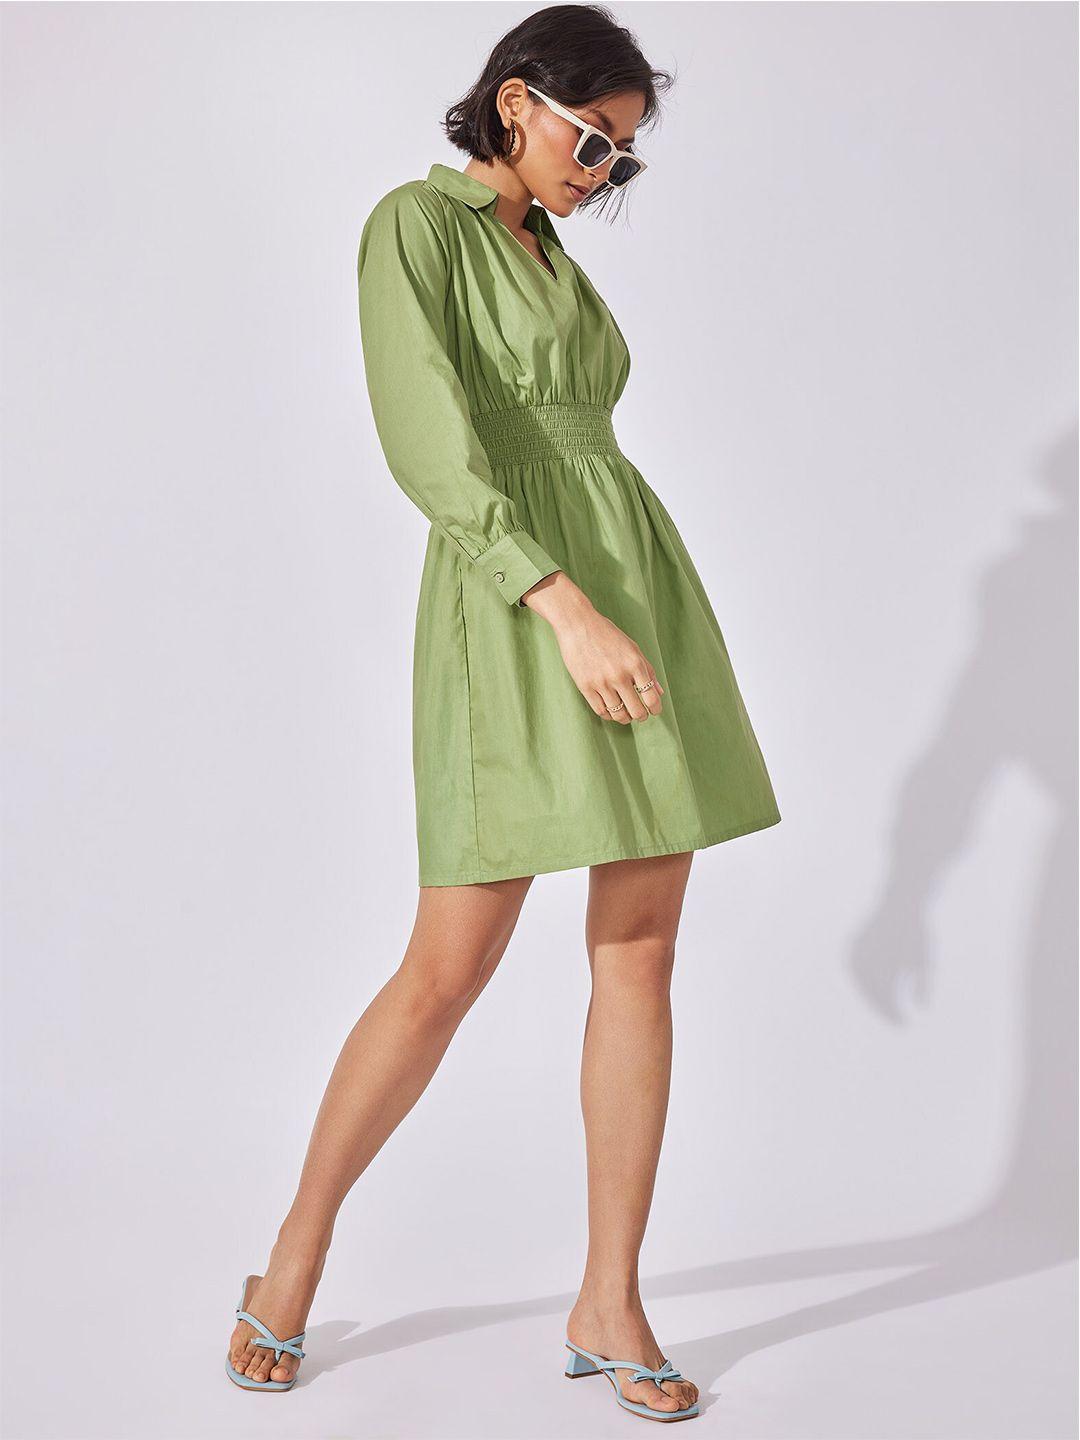 the-label-life-women-olive-green-cotton-dress